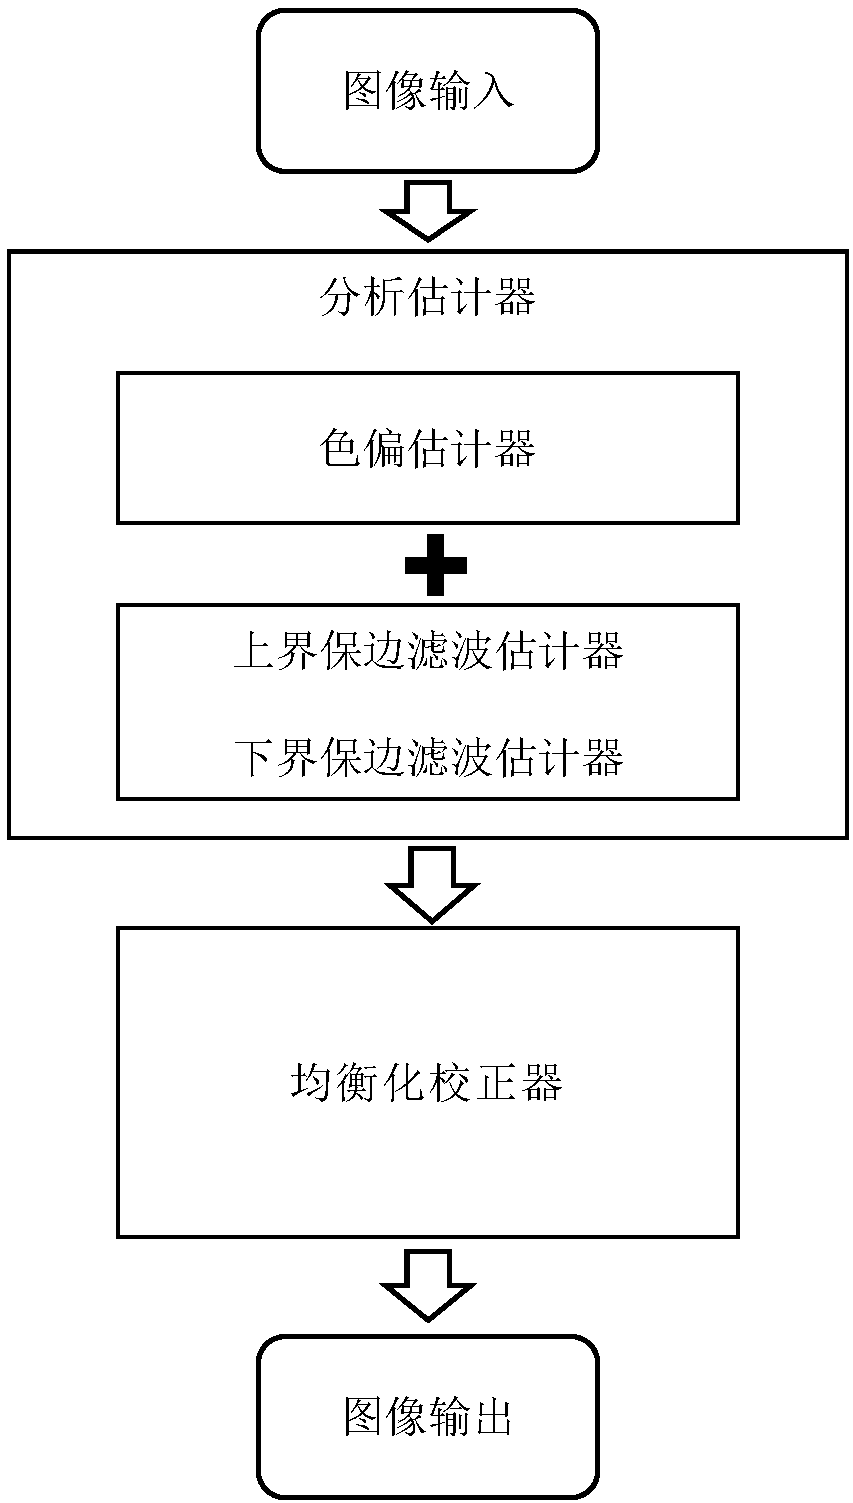 An online anti-yellow haze color cast self-correction image enhancement system with upper and lower bounds